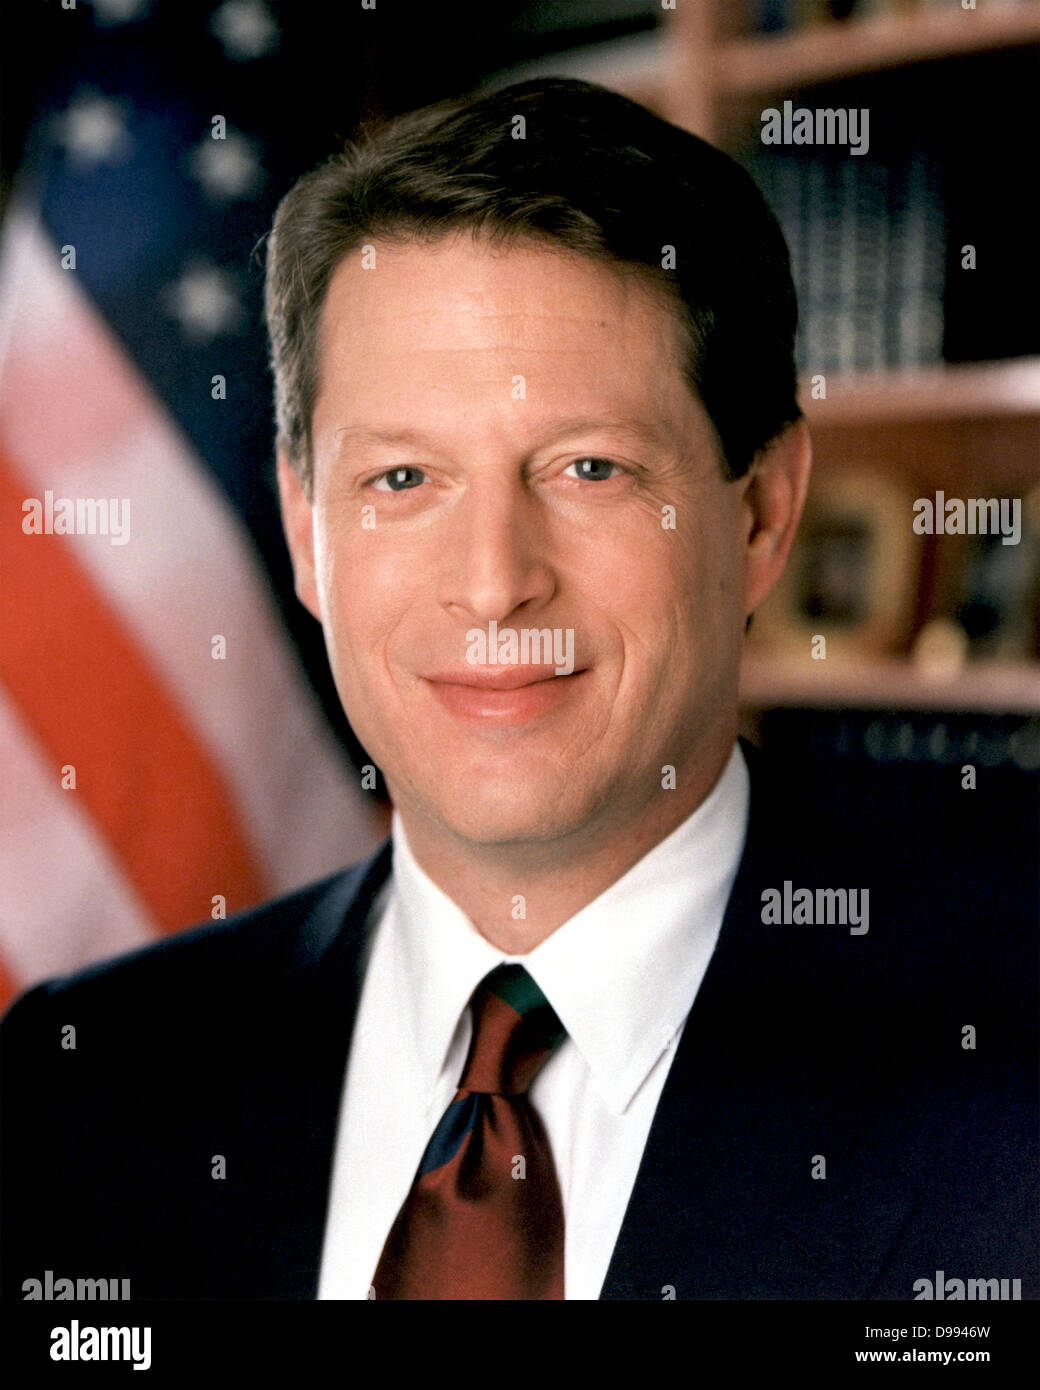 Albert Arnold 'Al' Gore, Jr. (born 1948) served as the 45th Vice-President of the United States 1993-2001 under President Bill Clinton. Head-and-shoulders portrait with stars-and-stripes in background. American Politician Stock Photo